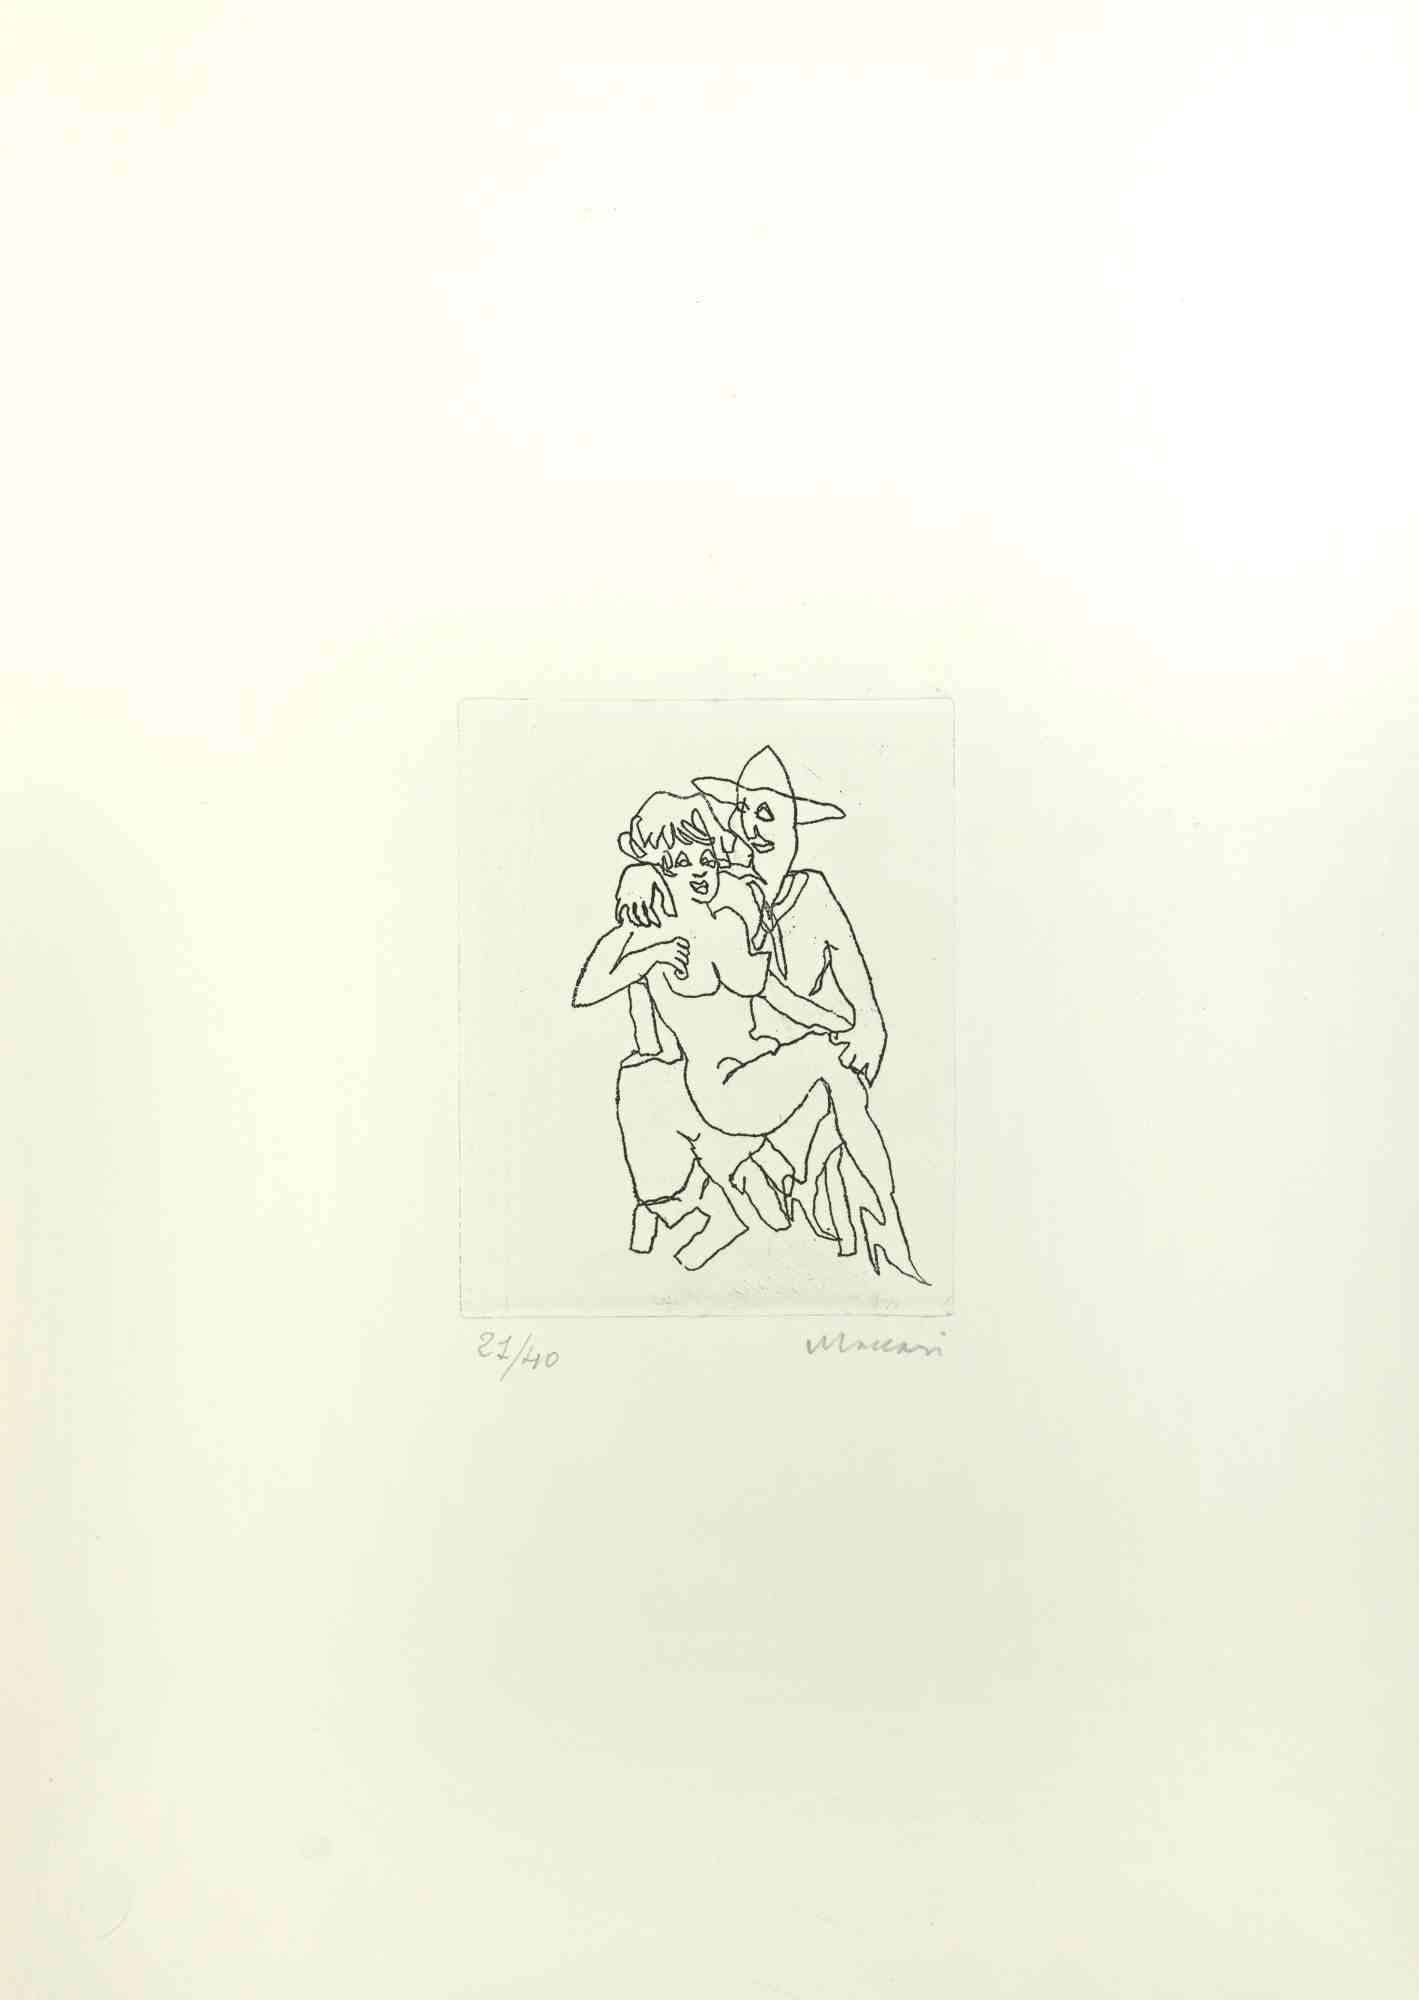 Nude  is an Etching and Drypoint realized by Mino Maccari in the Mid-20th Century.

Hand-signed in the lower right part.

Numbered. Edition,21/40.

Good conditions.

 

Mino Maccari (Siena, 1924-Rome, June 16, 1989) was an Italian writer, painter,